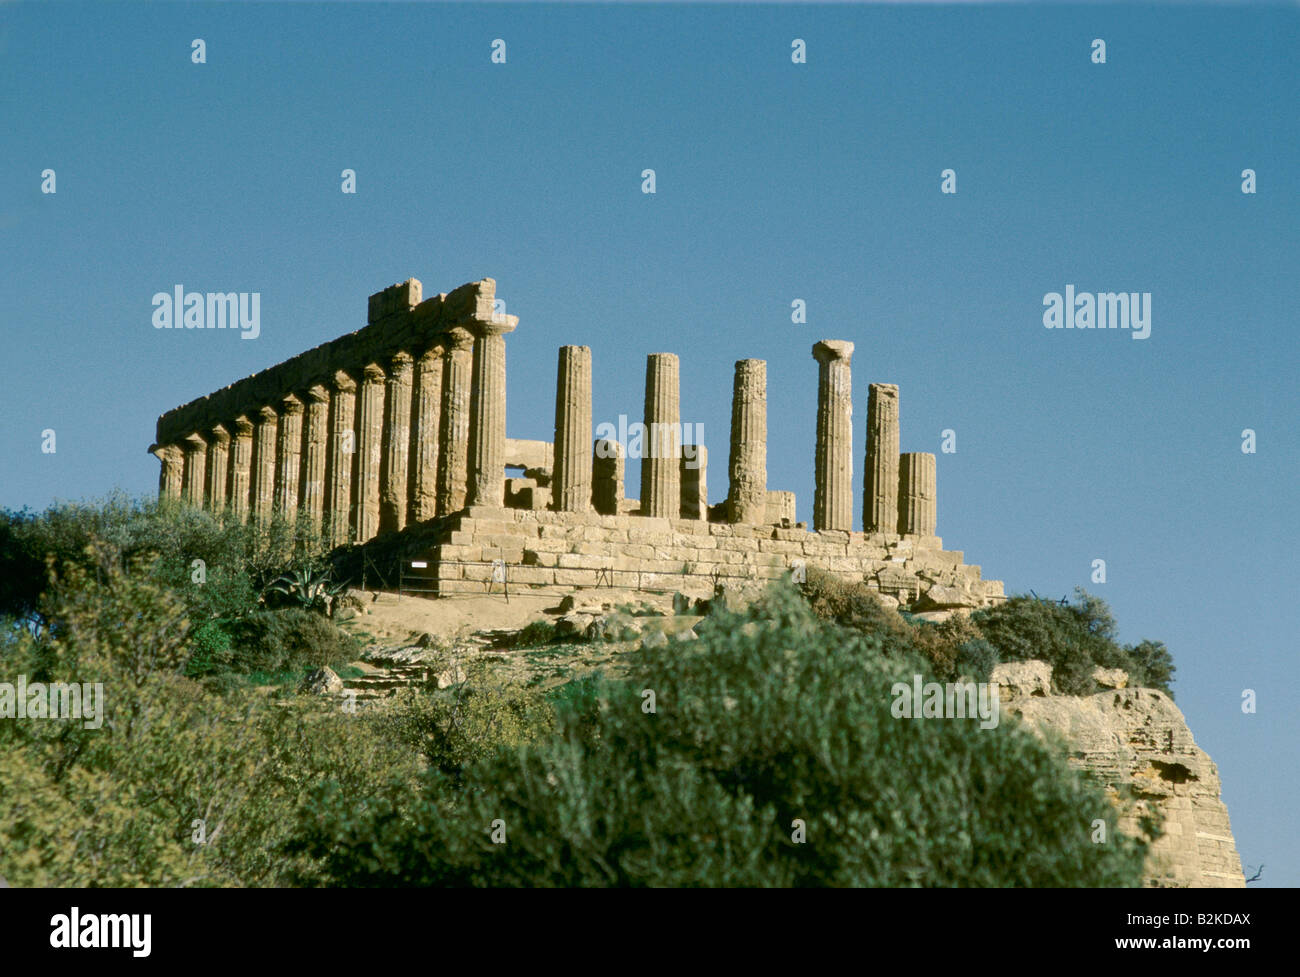 THE RUINS OF A GREEK TEMPLE WITH DORIC COLUMNS AT AGRIGENTO SICILY Stock Photo